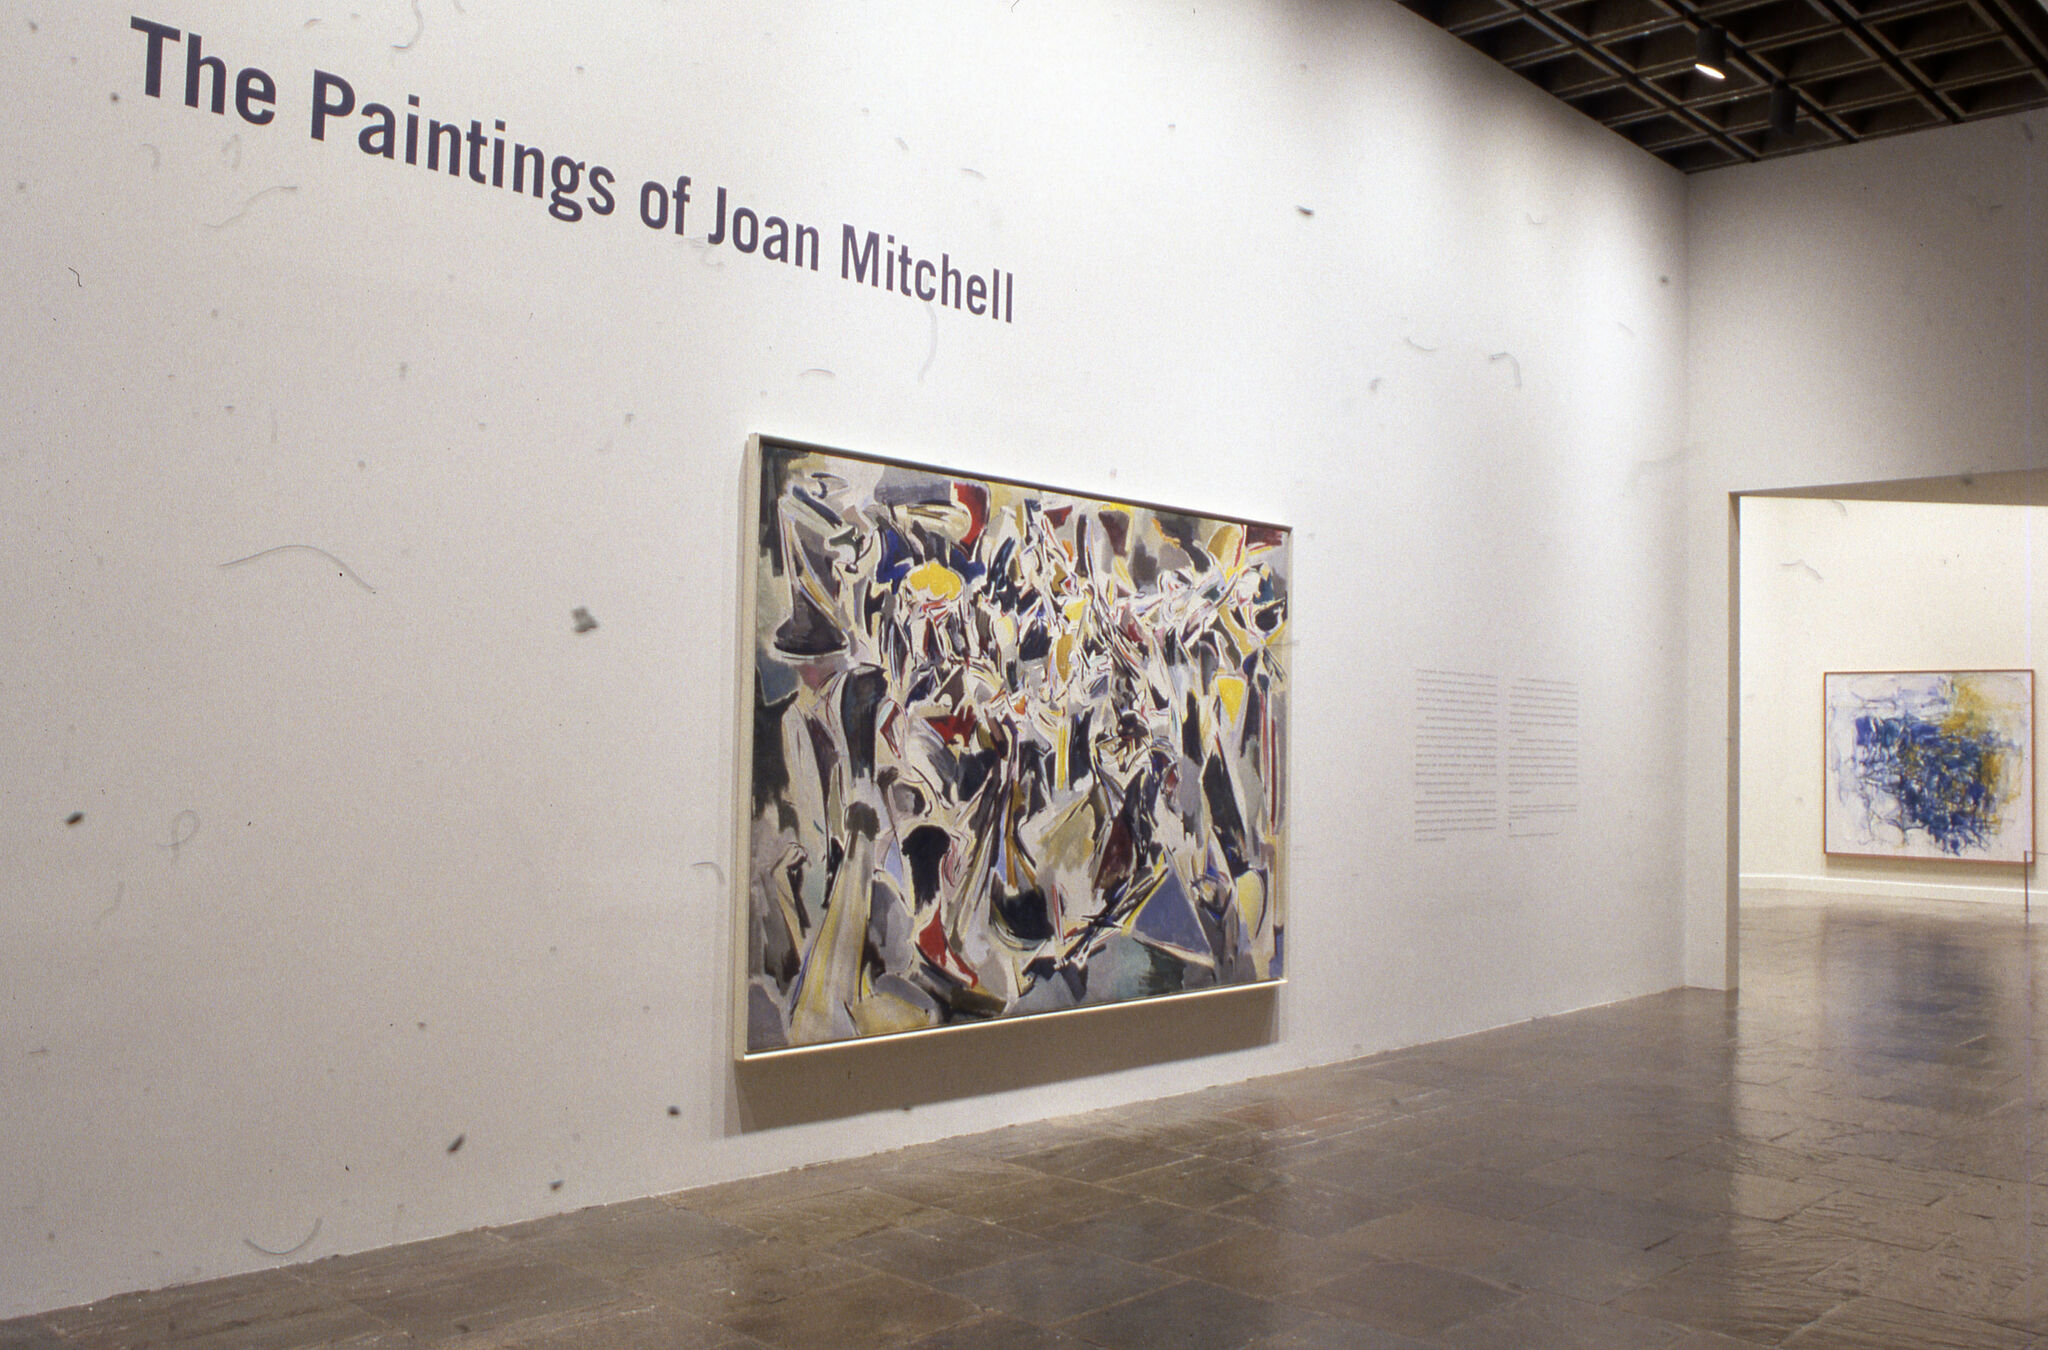 A large abstract painting displayed next to wall text for The Paintings of Joan Mitchell.